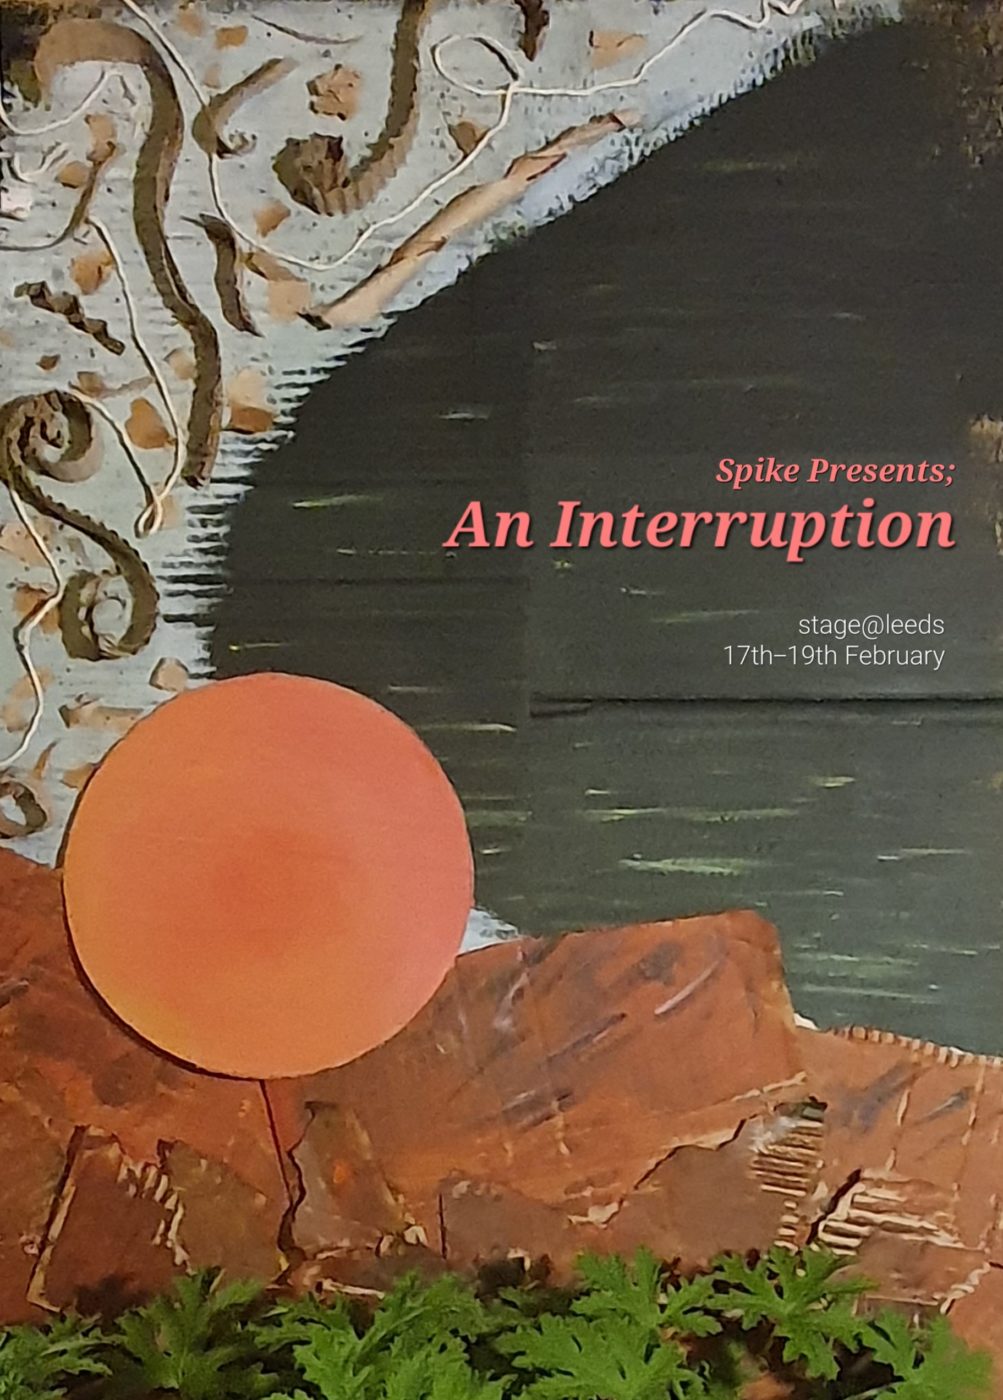 an abstract landscape with a large orange circle. text reads 'spike presents: an interruption'.